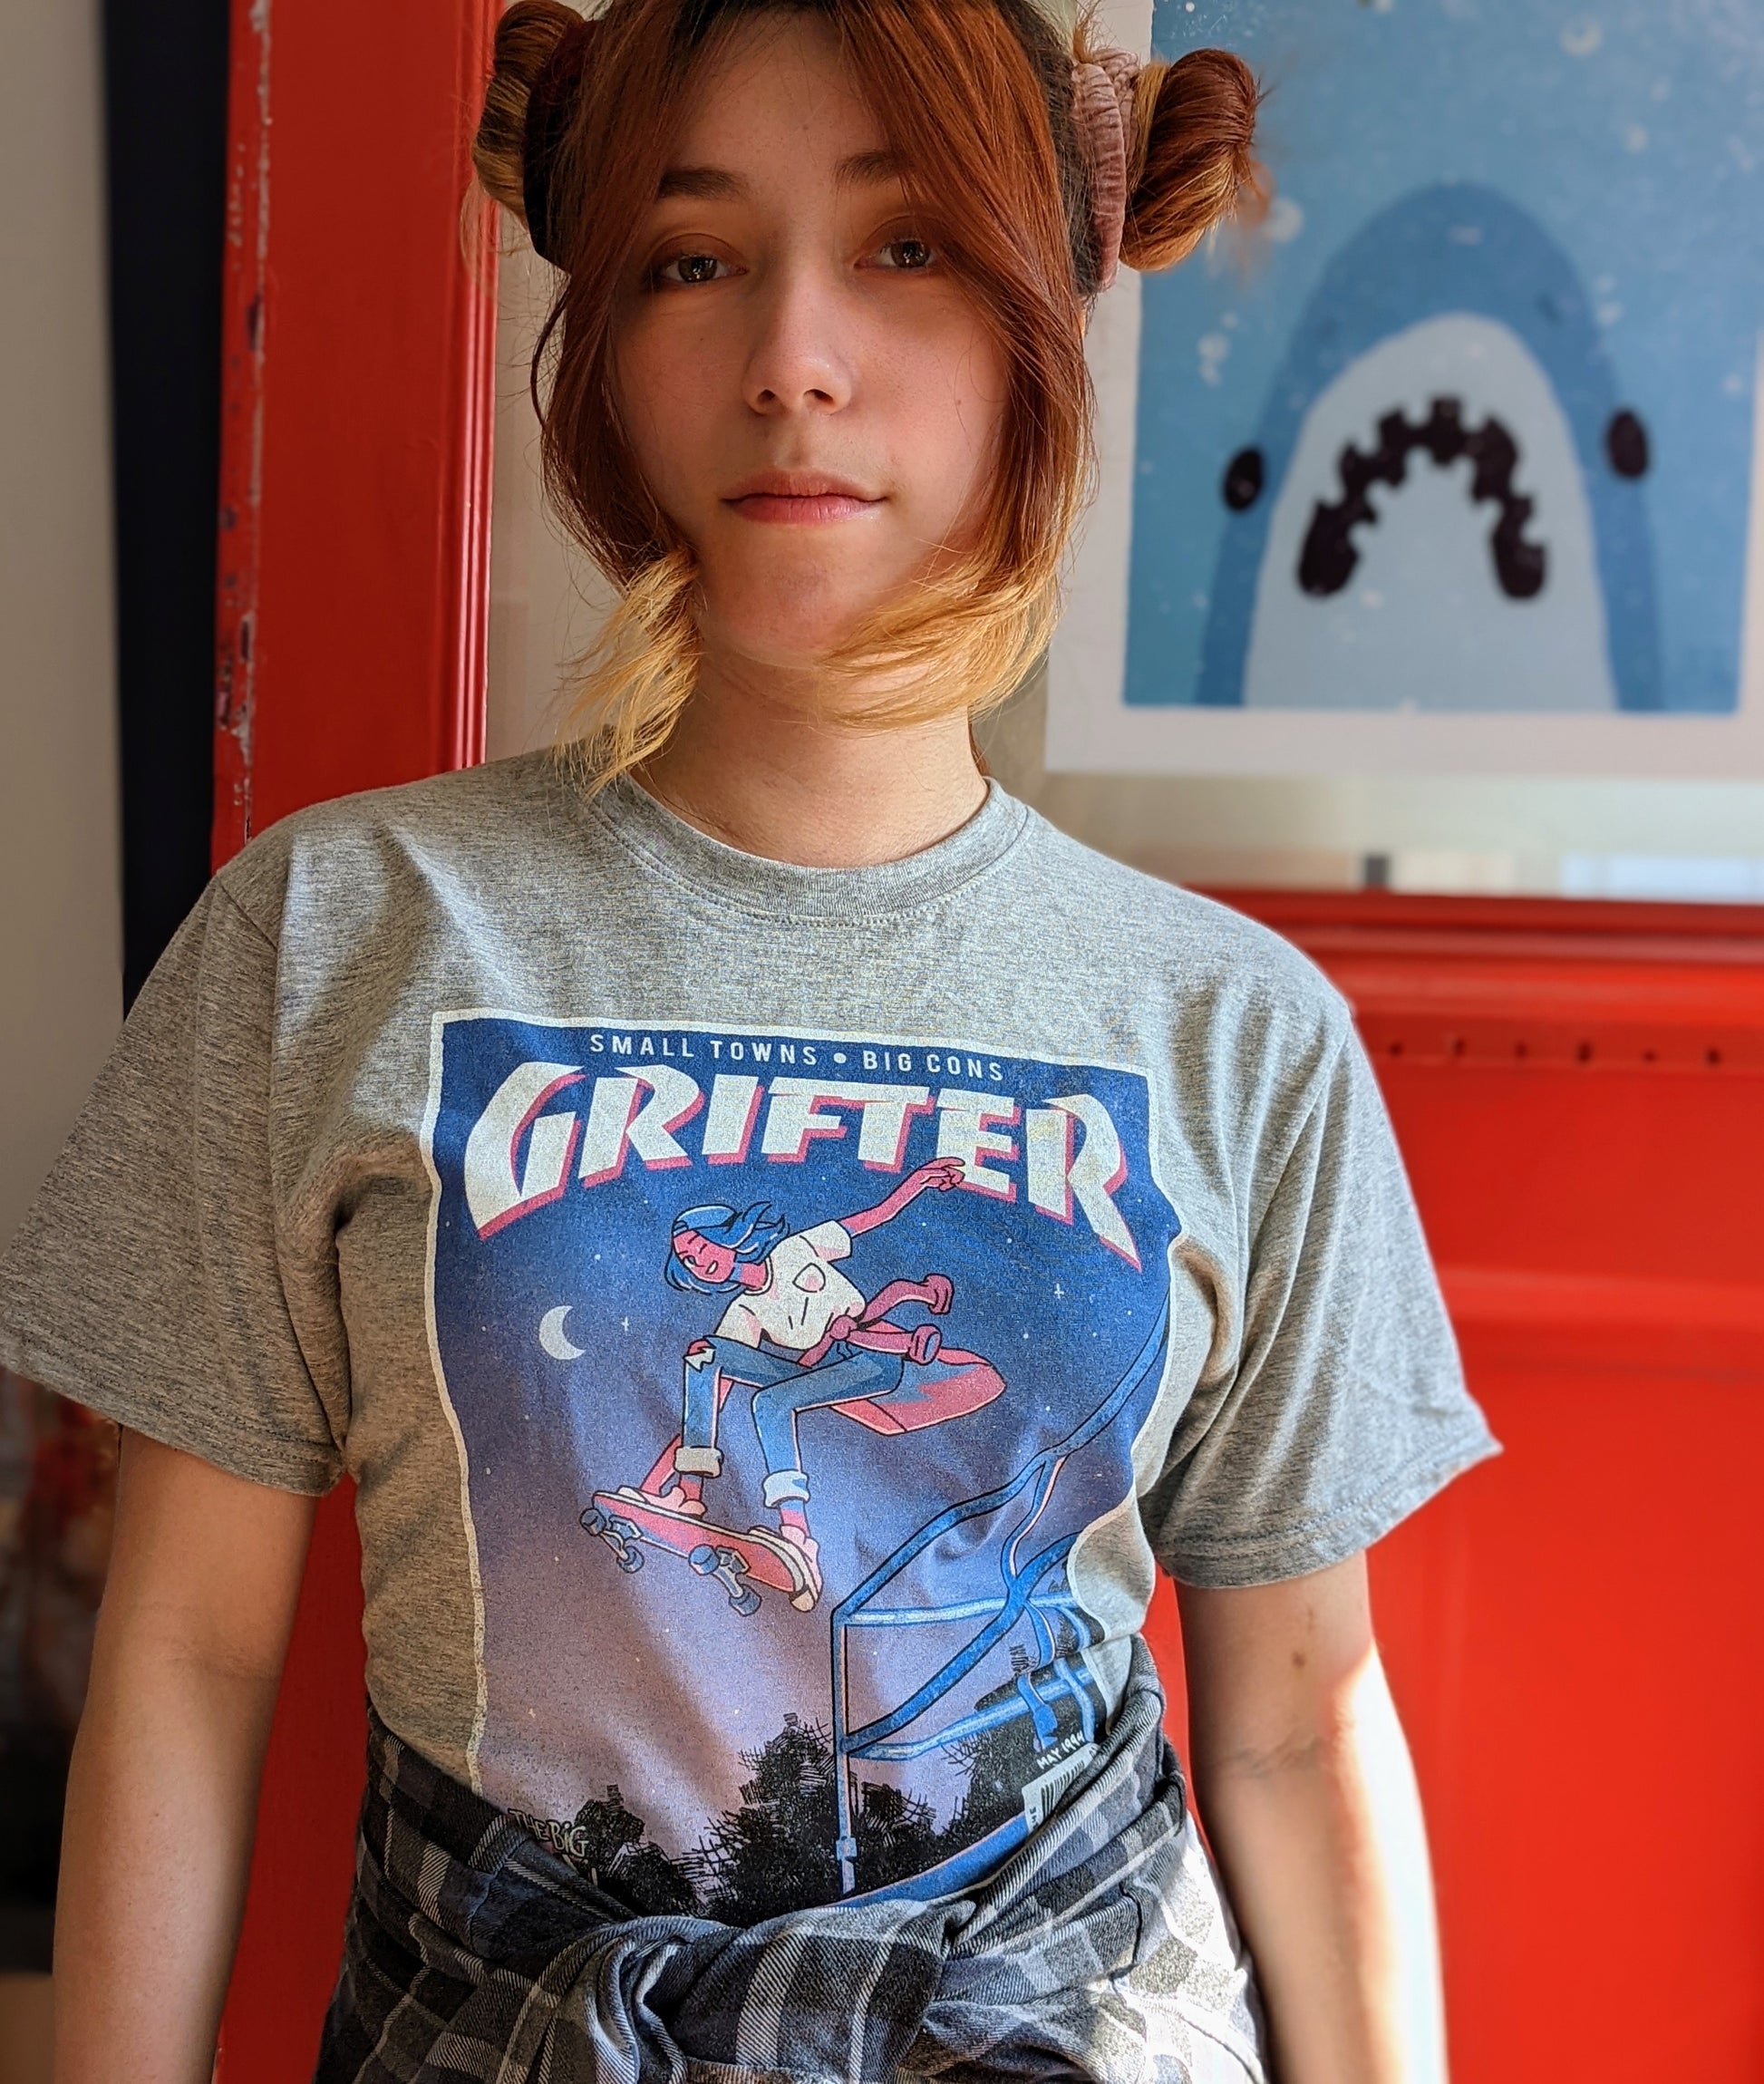 A t-shirt that says "GRIFTER," stylized like an old THRASHER magazine cover, featuring Ali from The Big Con jumping on a skateboard over some stairs. Light heathered grey shirt, with the image stylized like a magazine cover in rectangle on the front of the shirt. Magazine cover colours are largely Blue, light blue, and pink, like a stylized night sky. The magazine cover has a distressed look, like an old print.